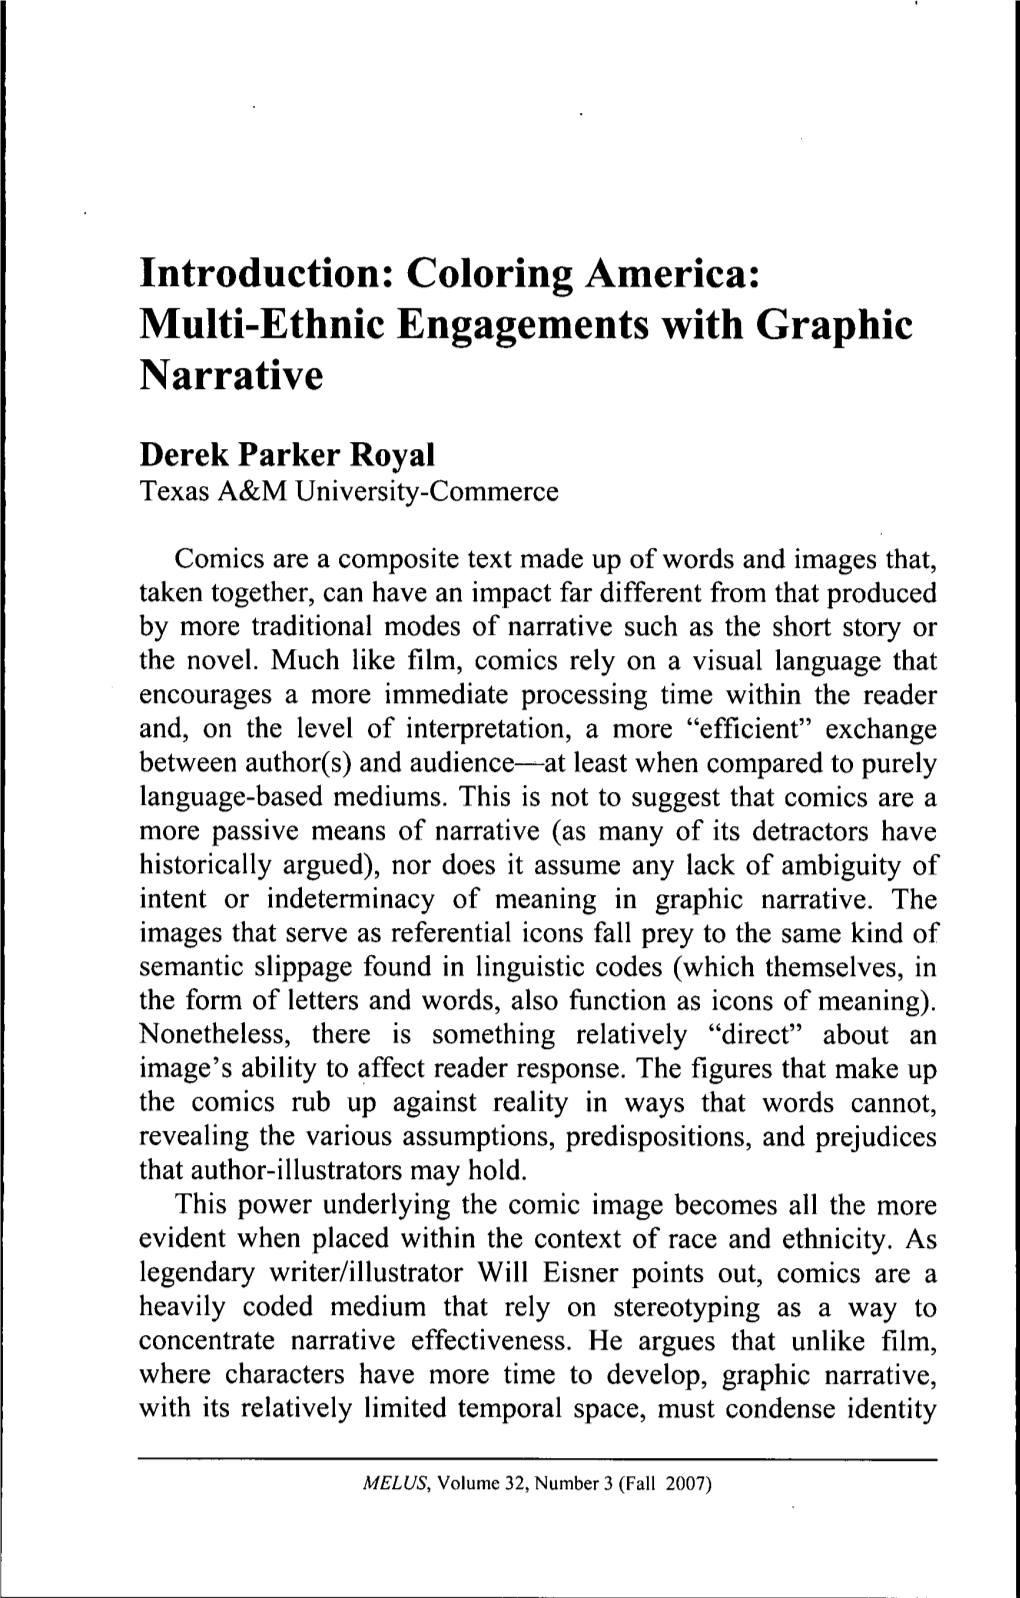 Coloring America: Multi-Ethnic Engagements with Graphic Narrative